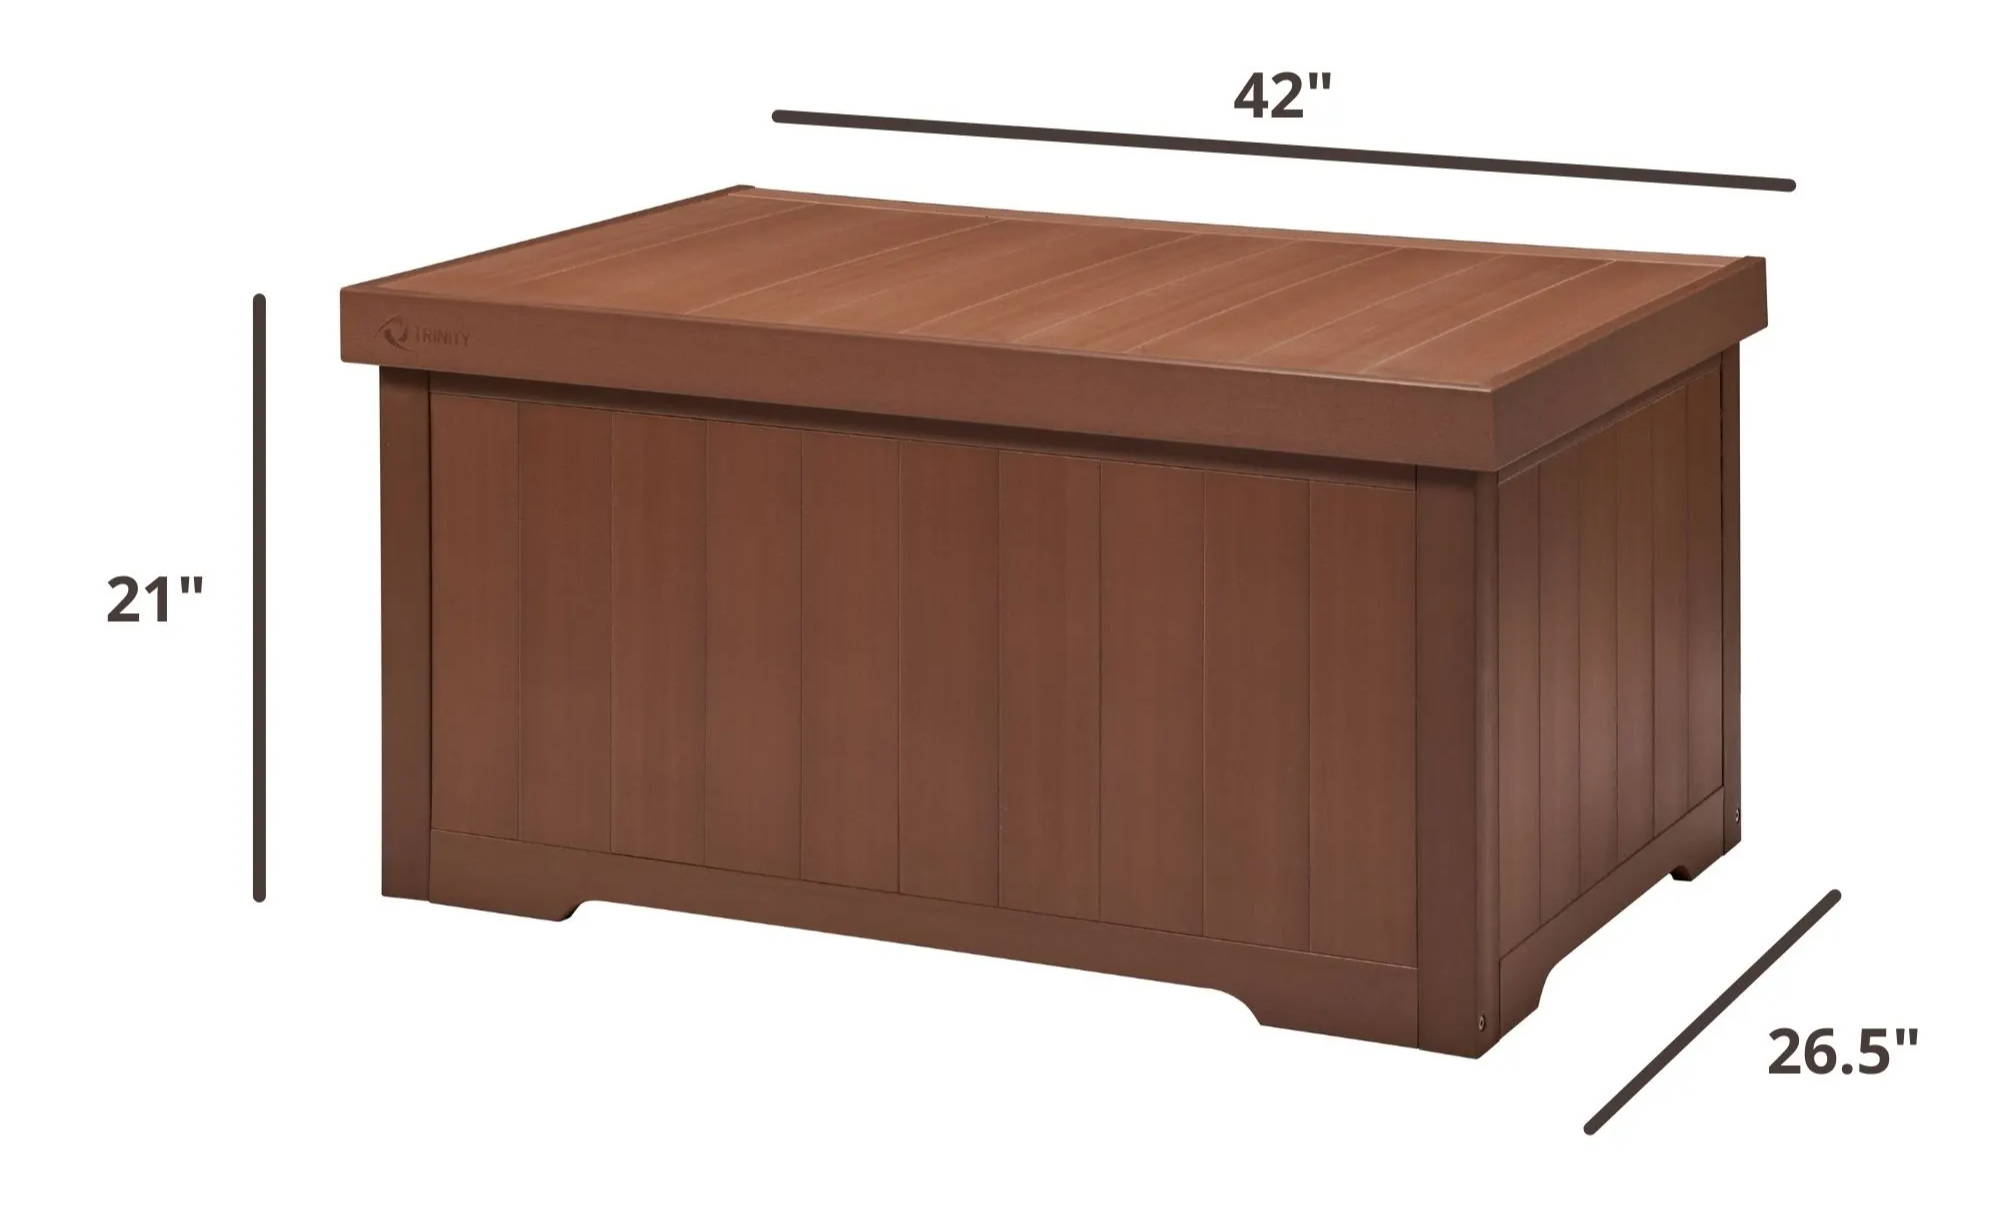 42 inches wide deck box